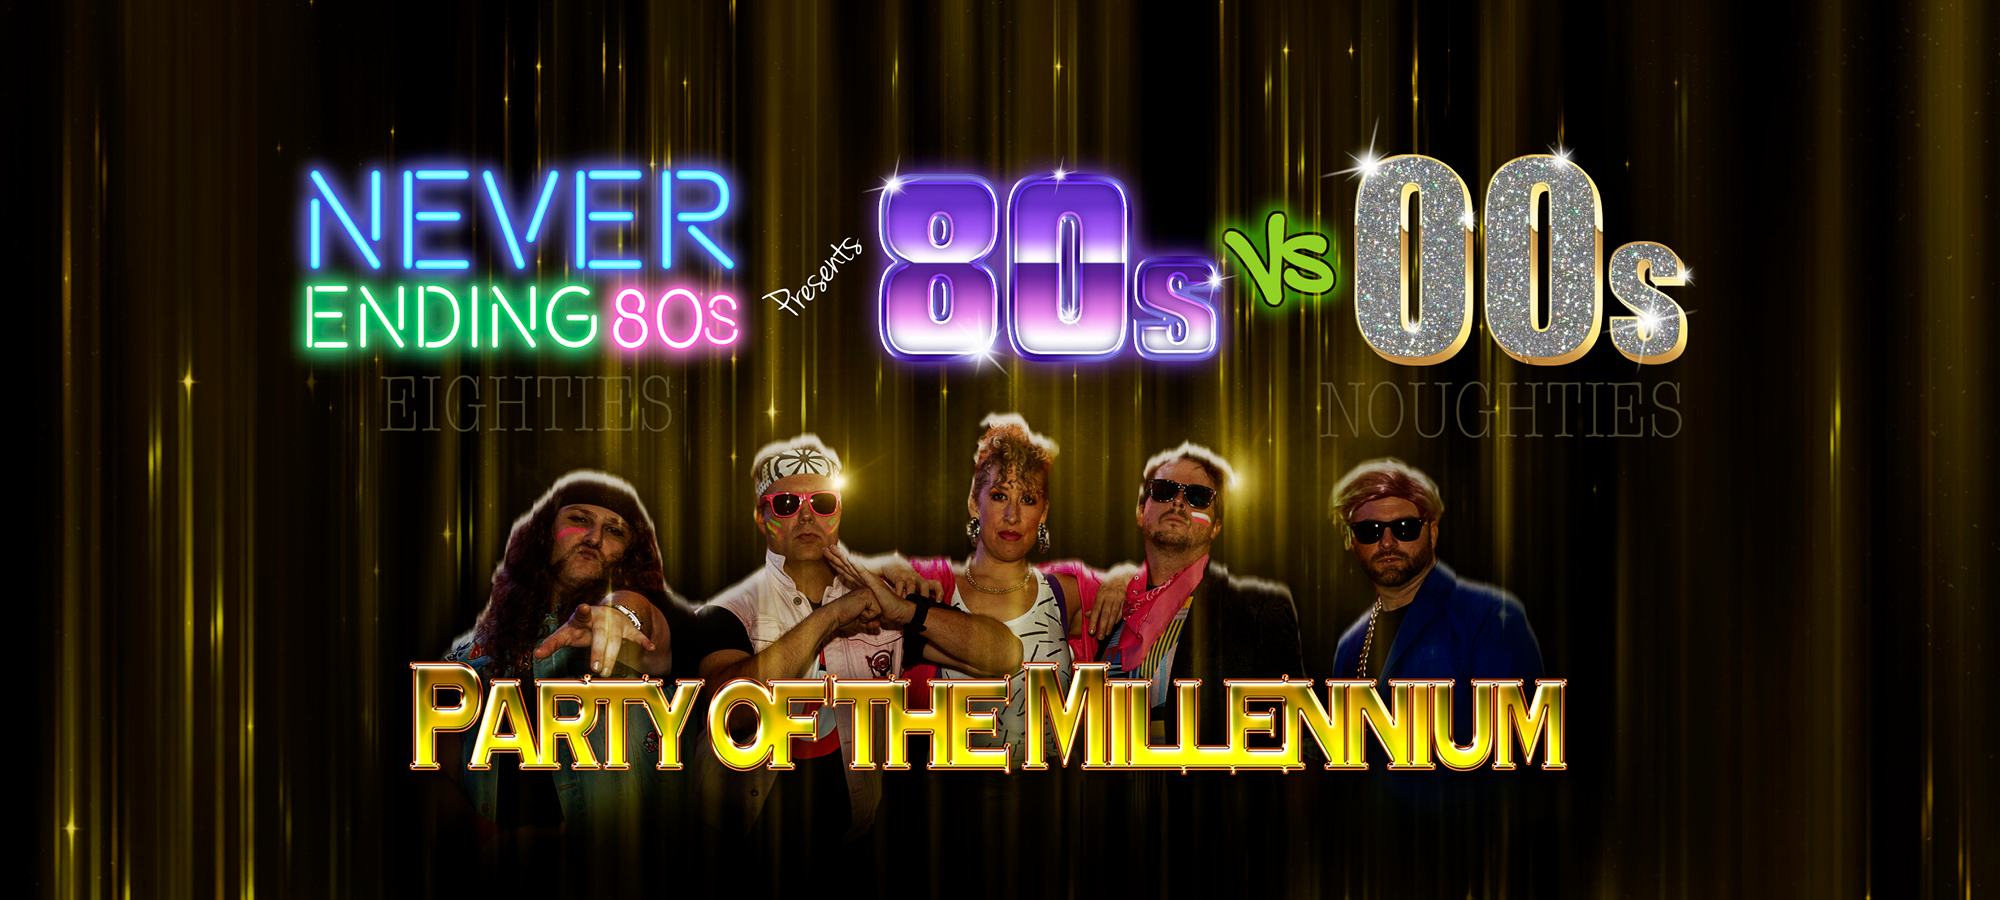 Never Ending 80s – Party of the Millennium